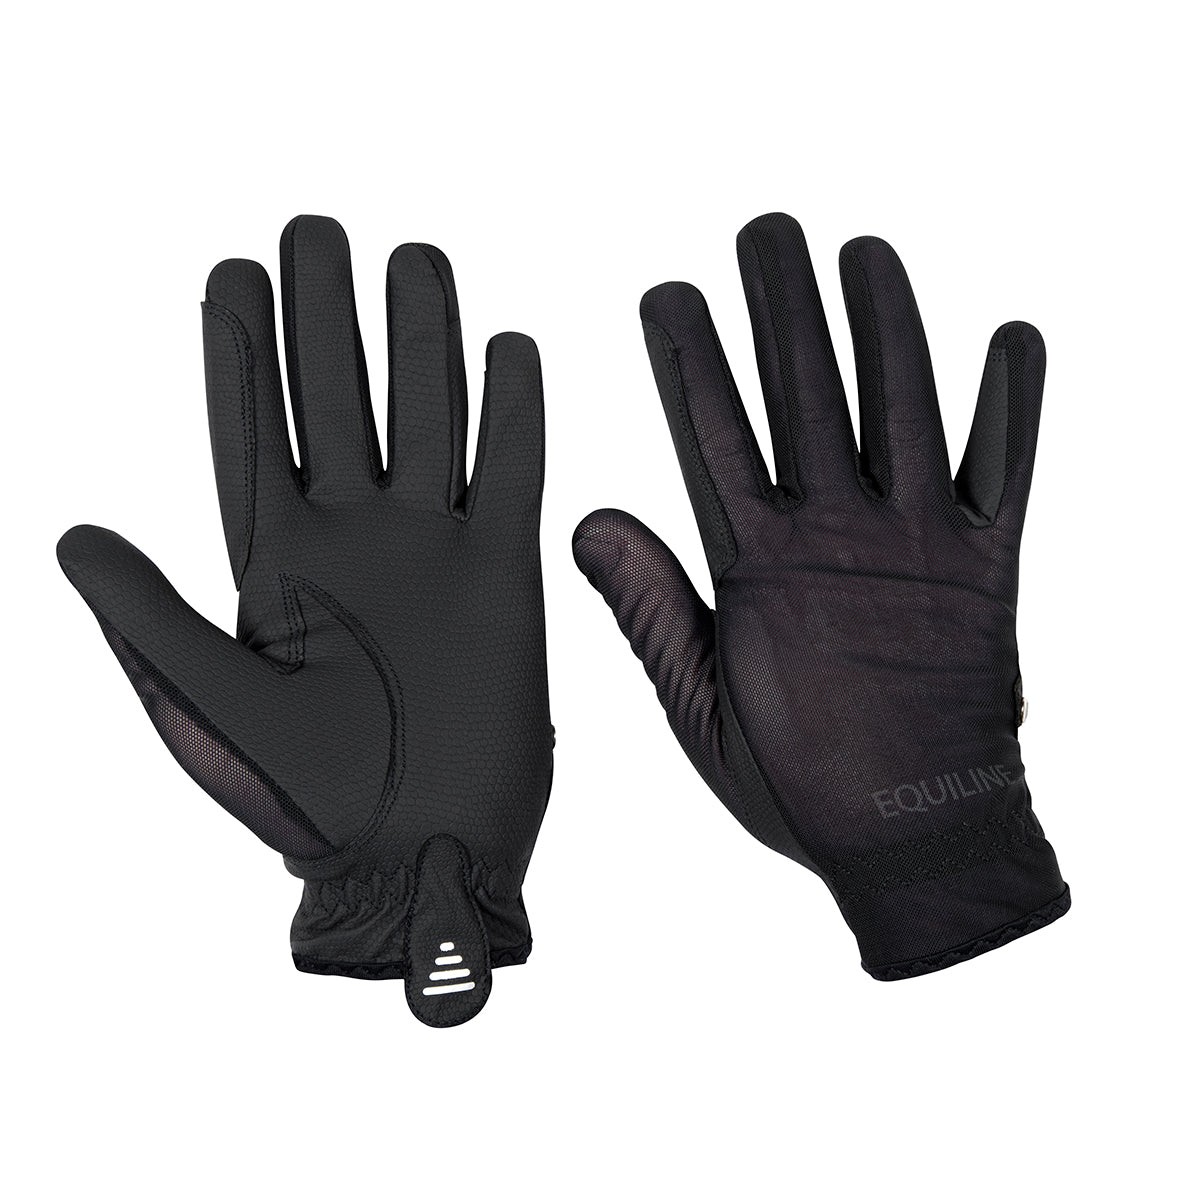 Equiline Summer Riding Glove